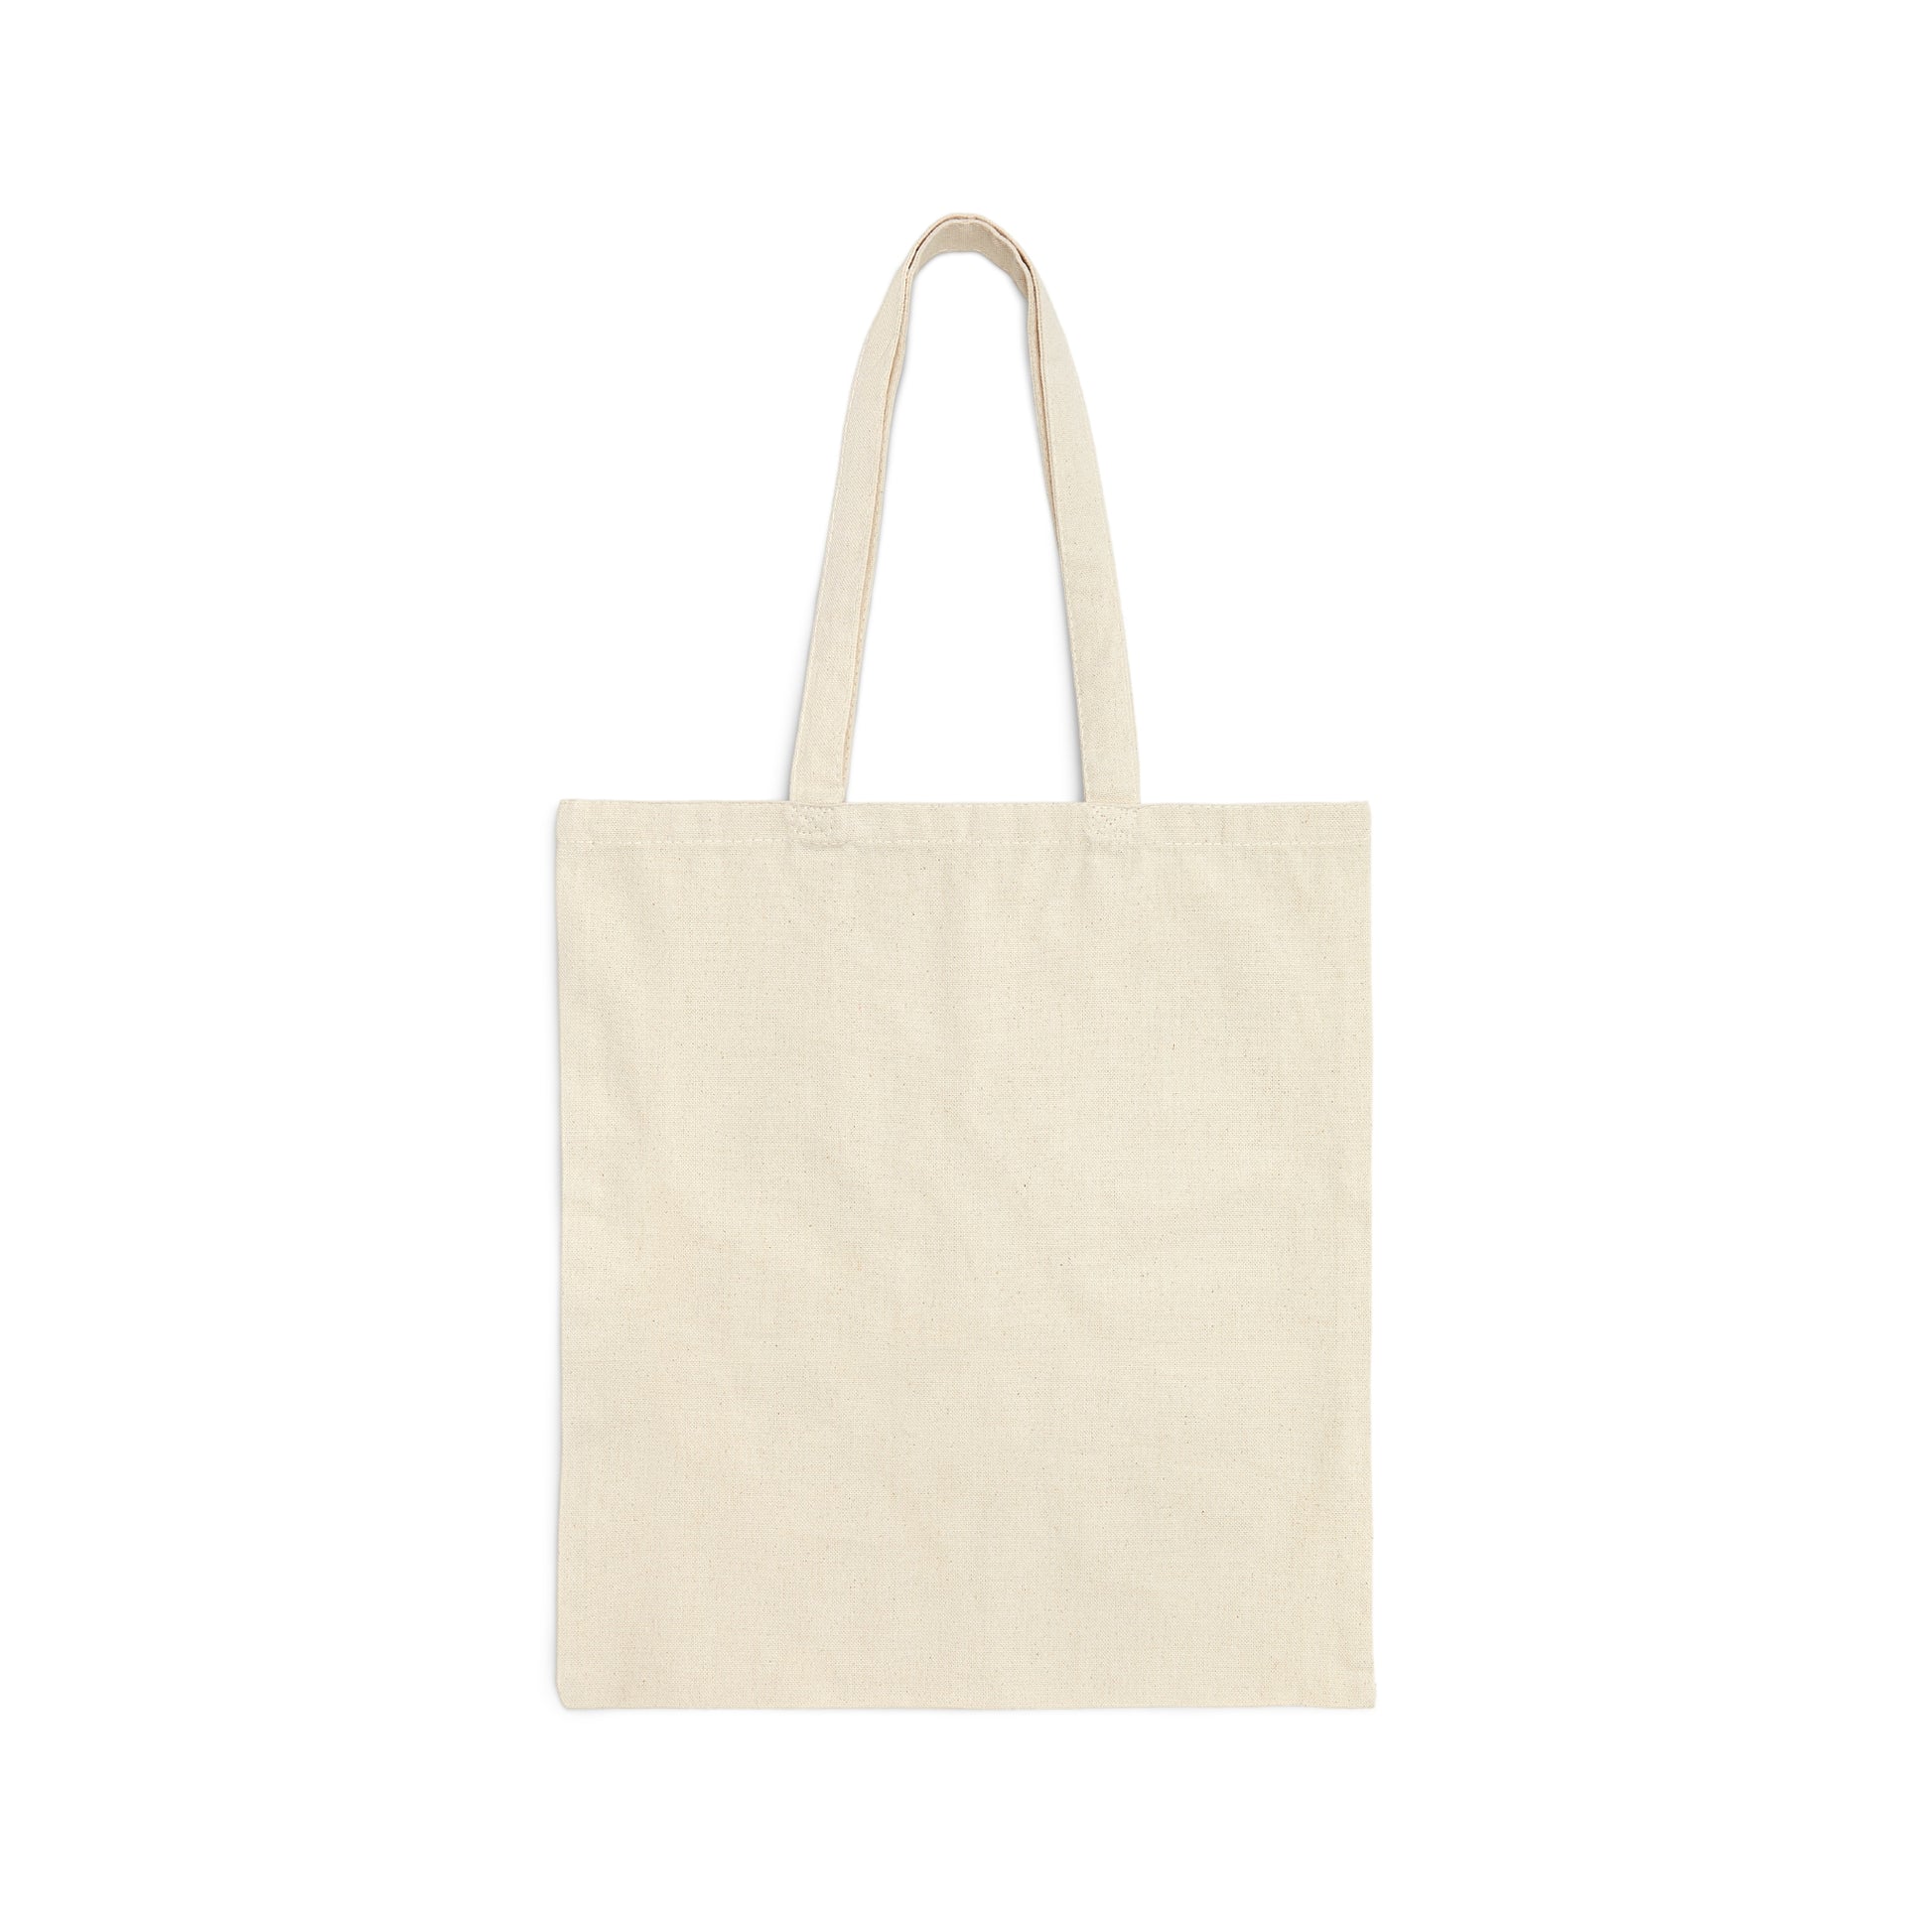 St. George “Wholesome Vacations” Cotton Canvas Tote Bag - Utah.com